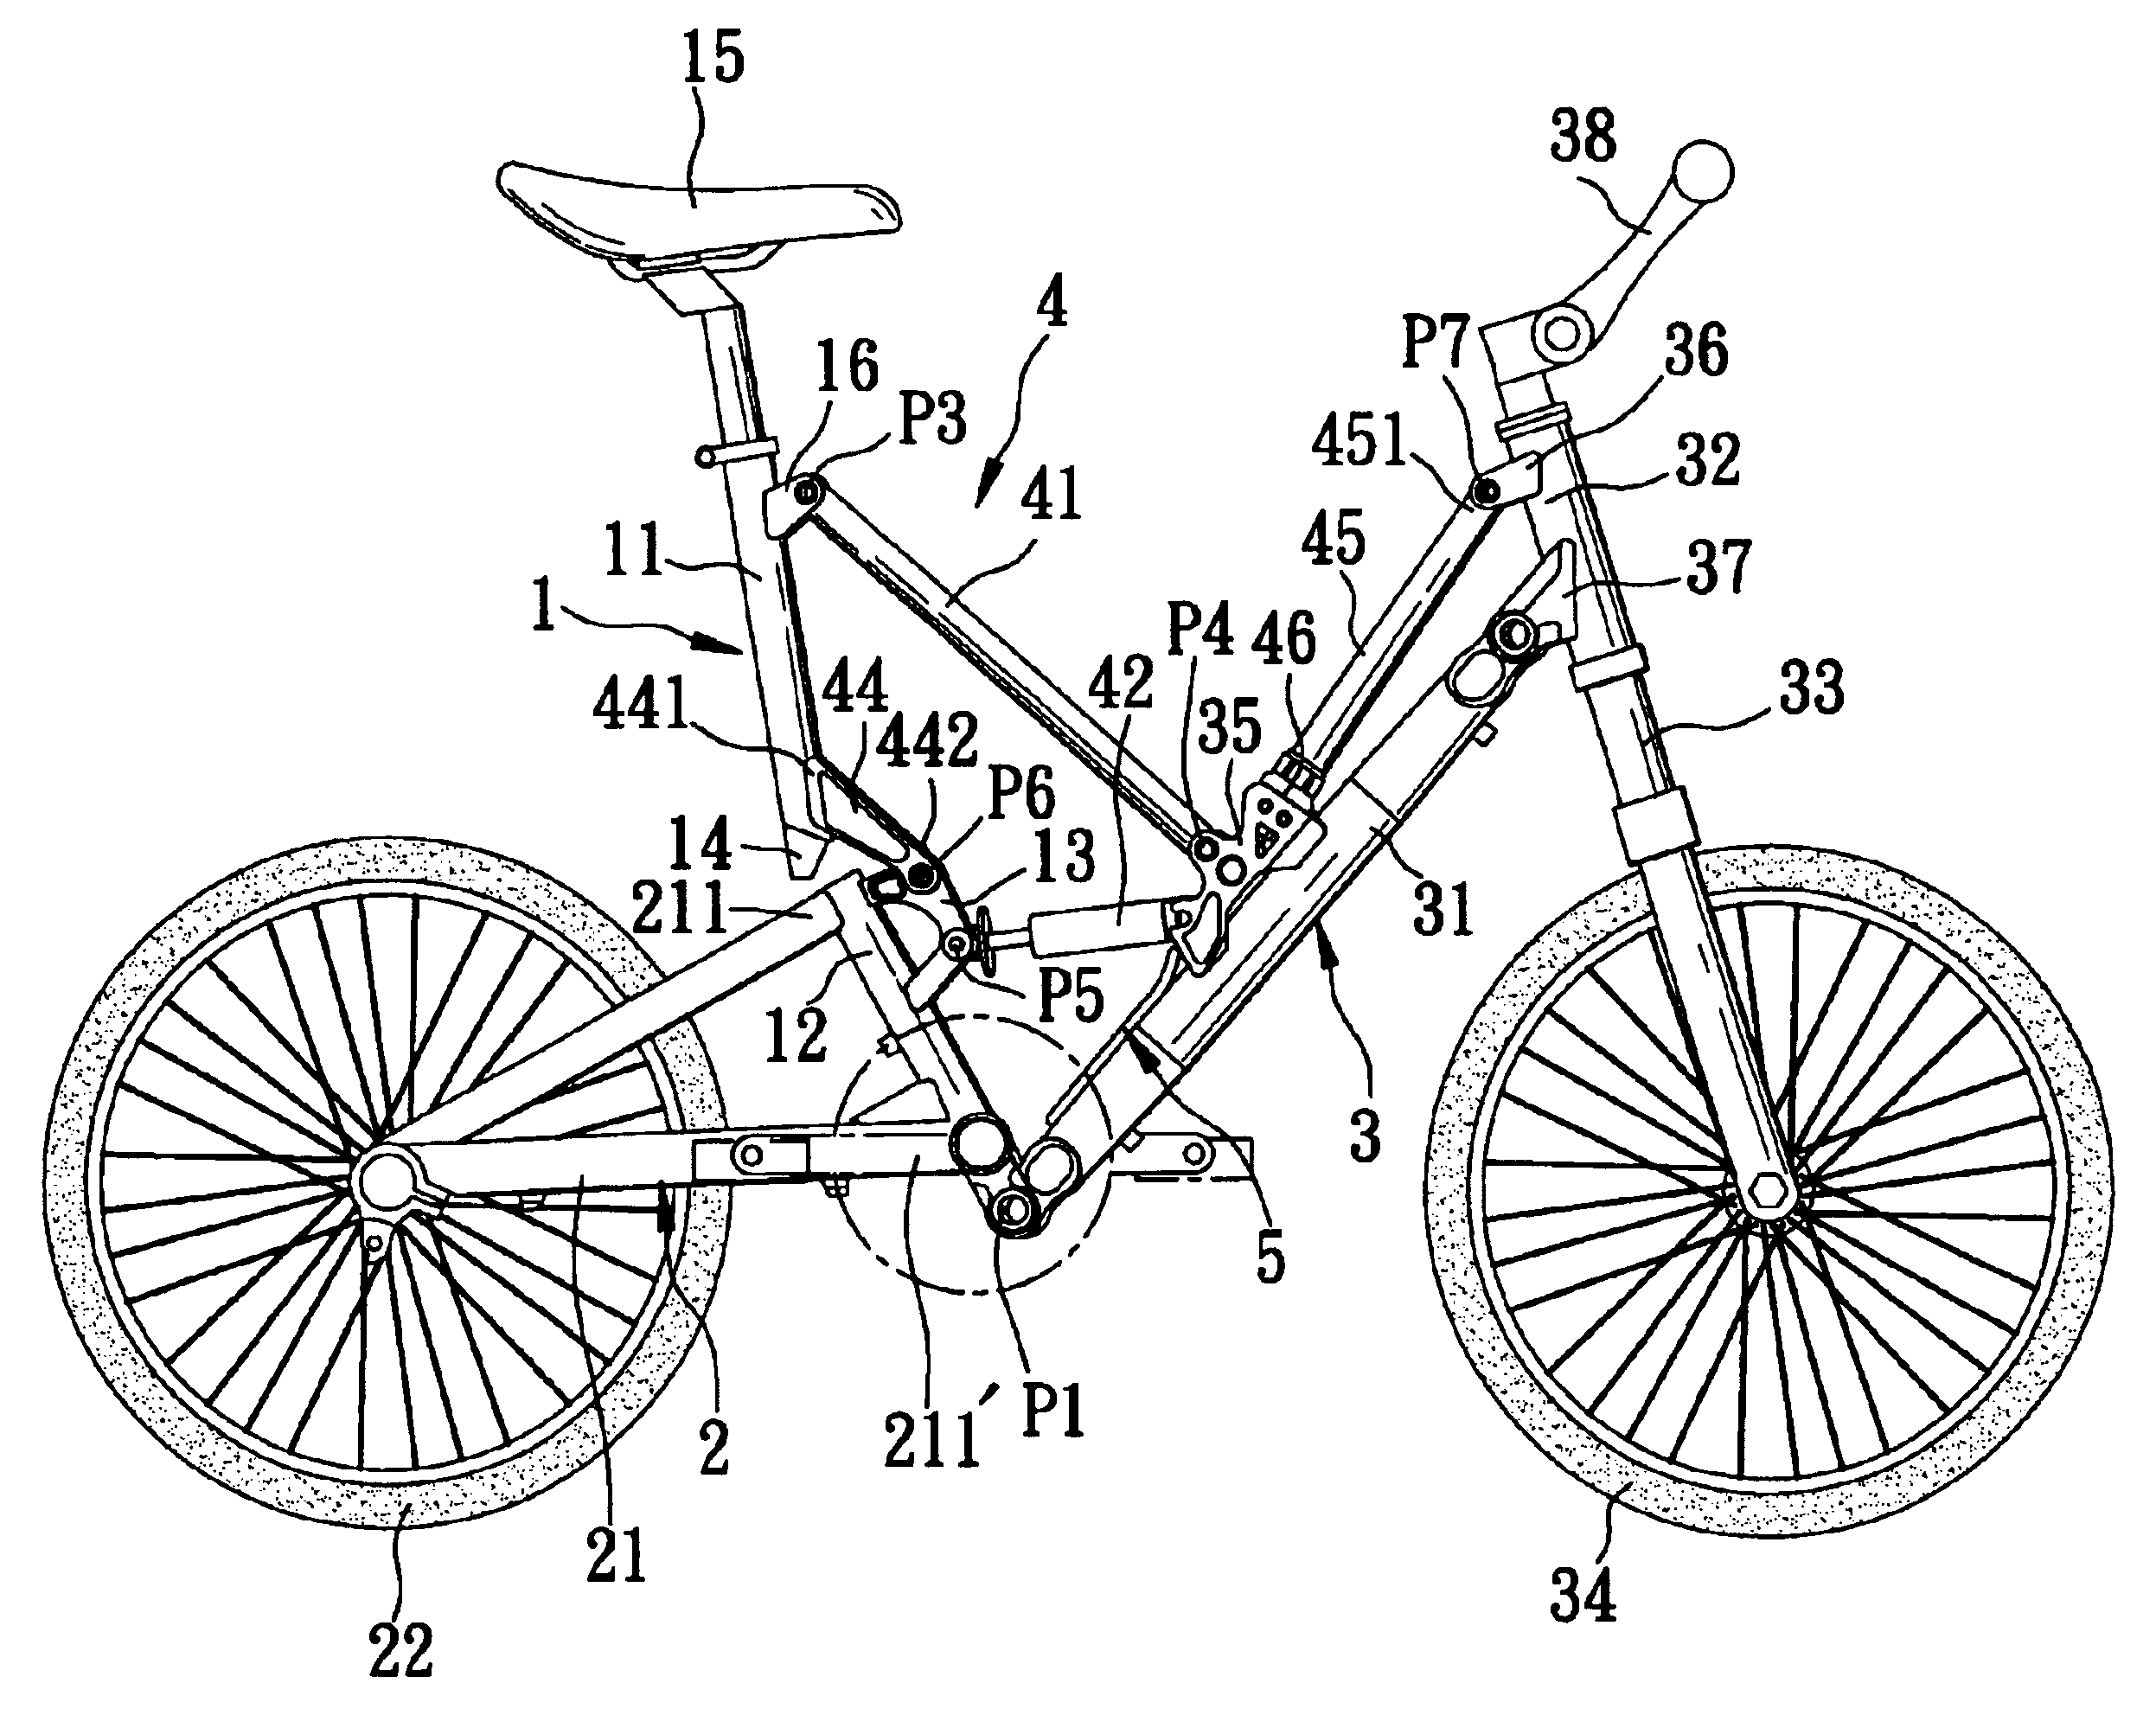 Bicycle foldable to align front and rear wheels along a transverse direction of the bicycle